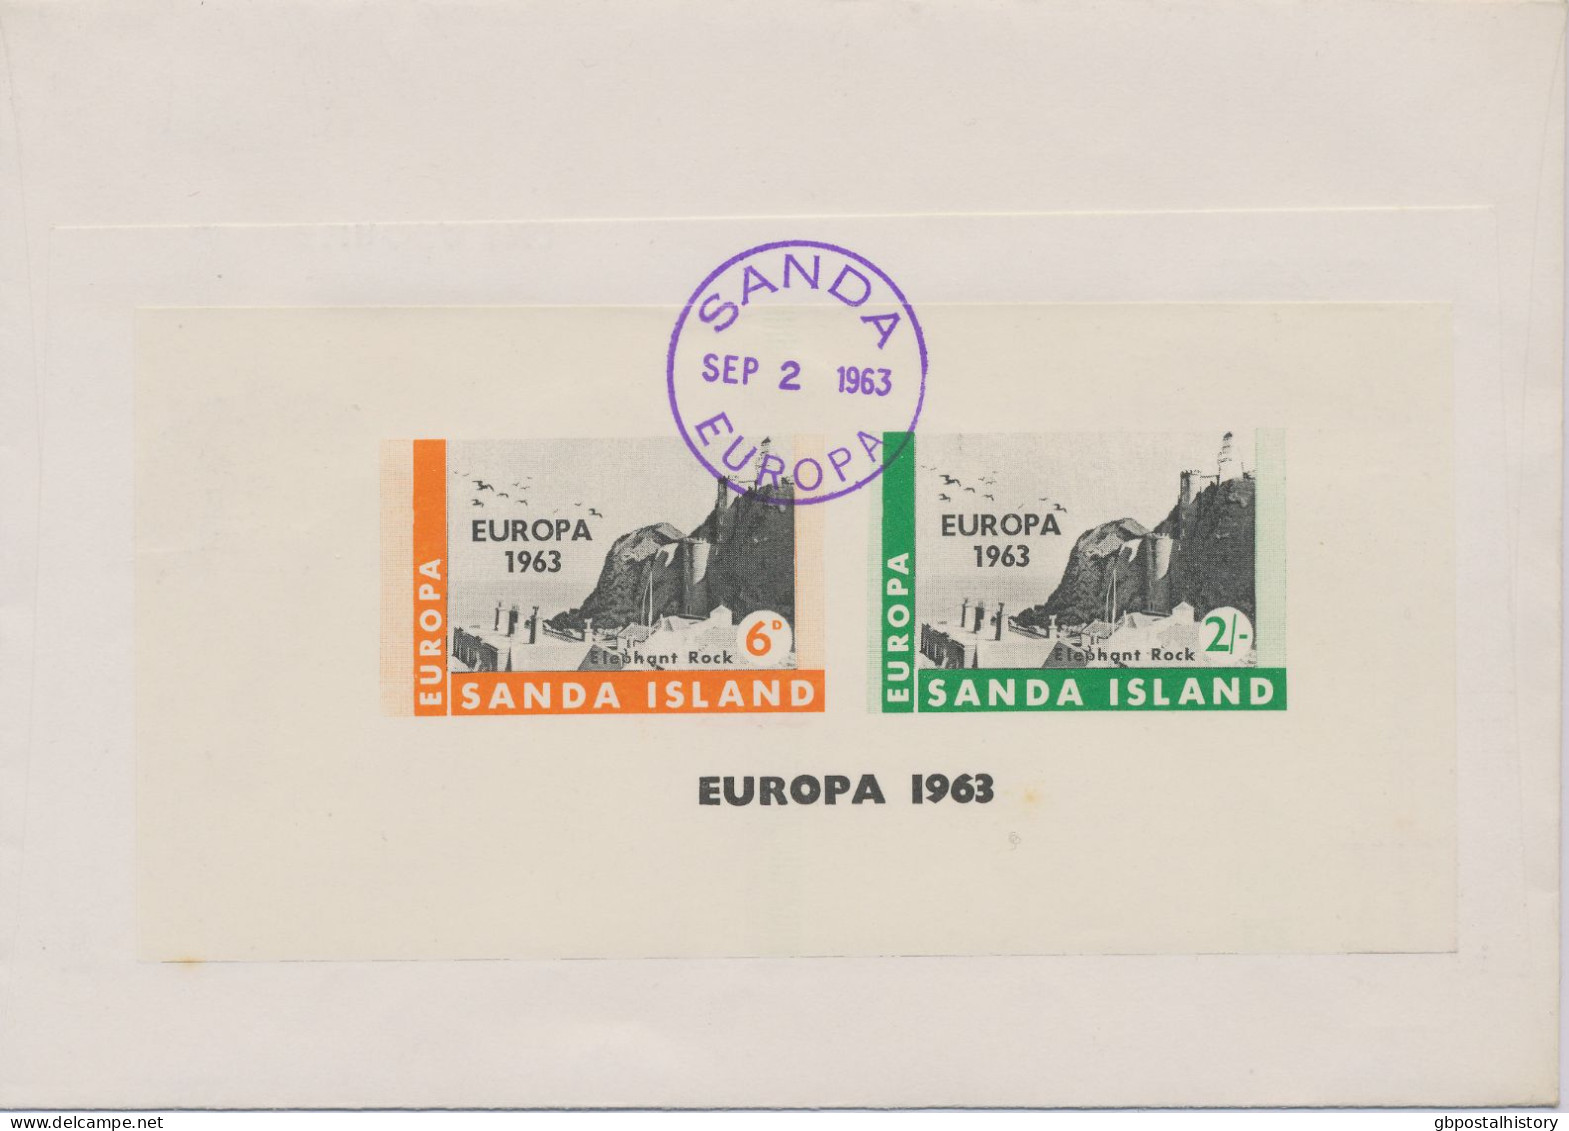 GB SANDA ISLAND COLLECTION 1962/6, 7 different EUROPA-FDC's in superb condition, extremely rare